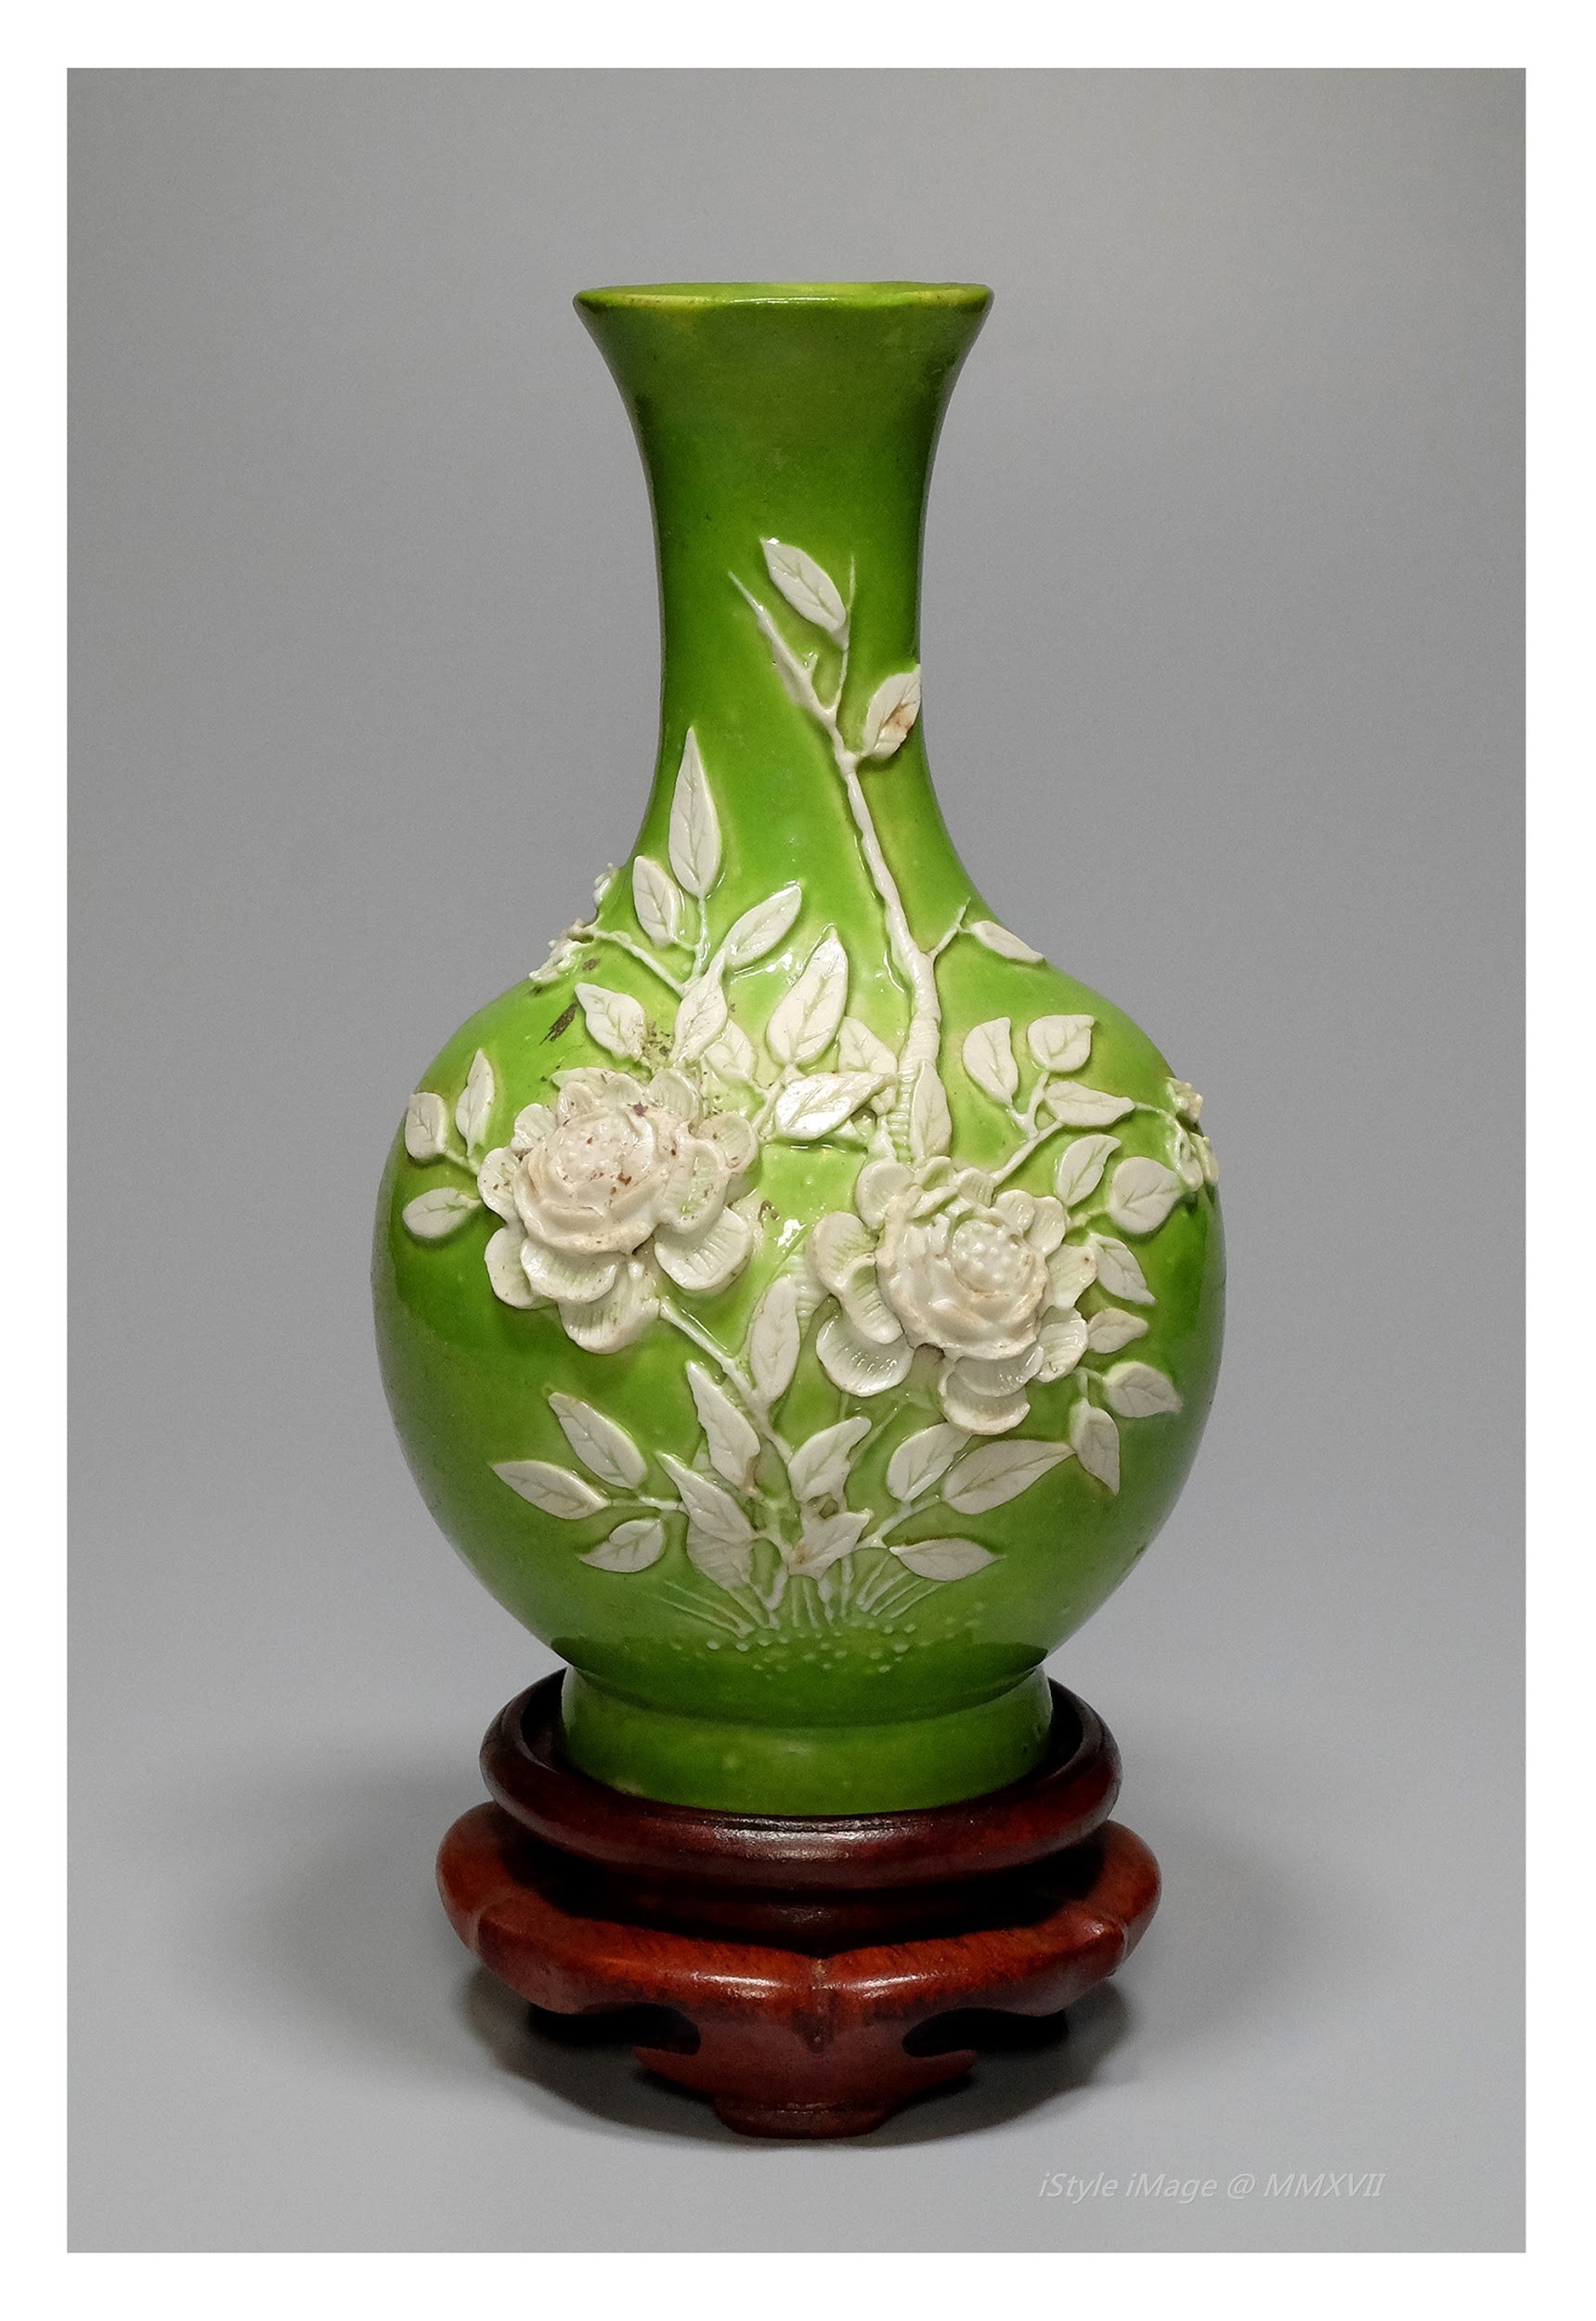 <br><h4>Lot 17 : A beautiful famille-rose bright green-glazed ground vase  (Guangxu Qing period )</h4>
					A beautiful famille-rose bright green-glazed ground vase, the compressed globular body rising from a short foot to a tall waisted neck, slip-decorated on the exterior with peony branches in soft white.
					<br>Measurements (H) high 13 CM, (W)width 7.5 CM<br><br><br>美麗的綠地白牡丹粉彩花瓶  ( 清光緒時期 )<br>一個美麗的粉彩花瓶，球狀的瓶身從短腳上升到一個高腰的頸部與外翻邊緣，鮮豔的綠色地在外部裝飾上柔和的白牡丹。<br>尺寸(H)高 13 厘米,  (W)濶7.5 厘米